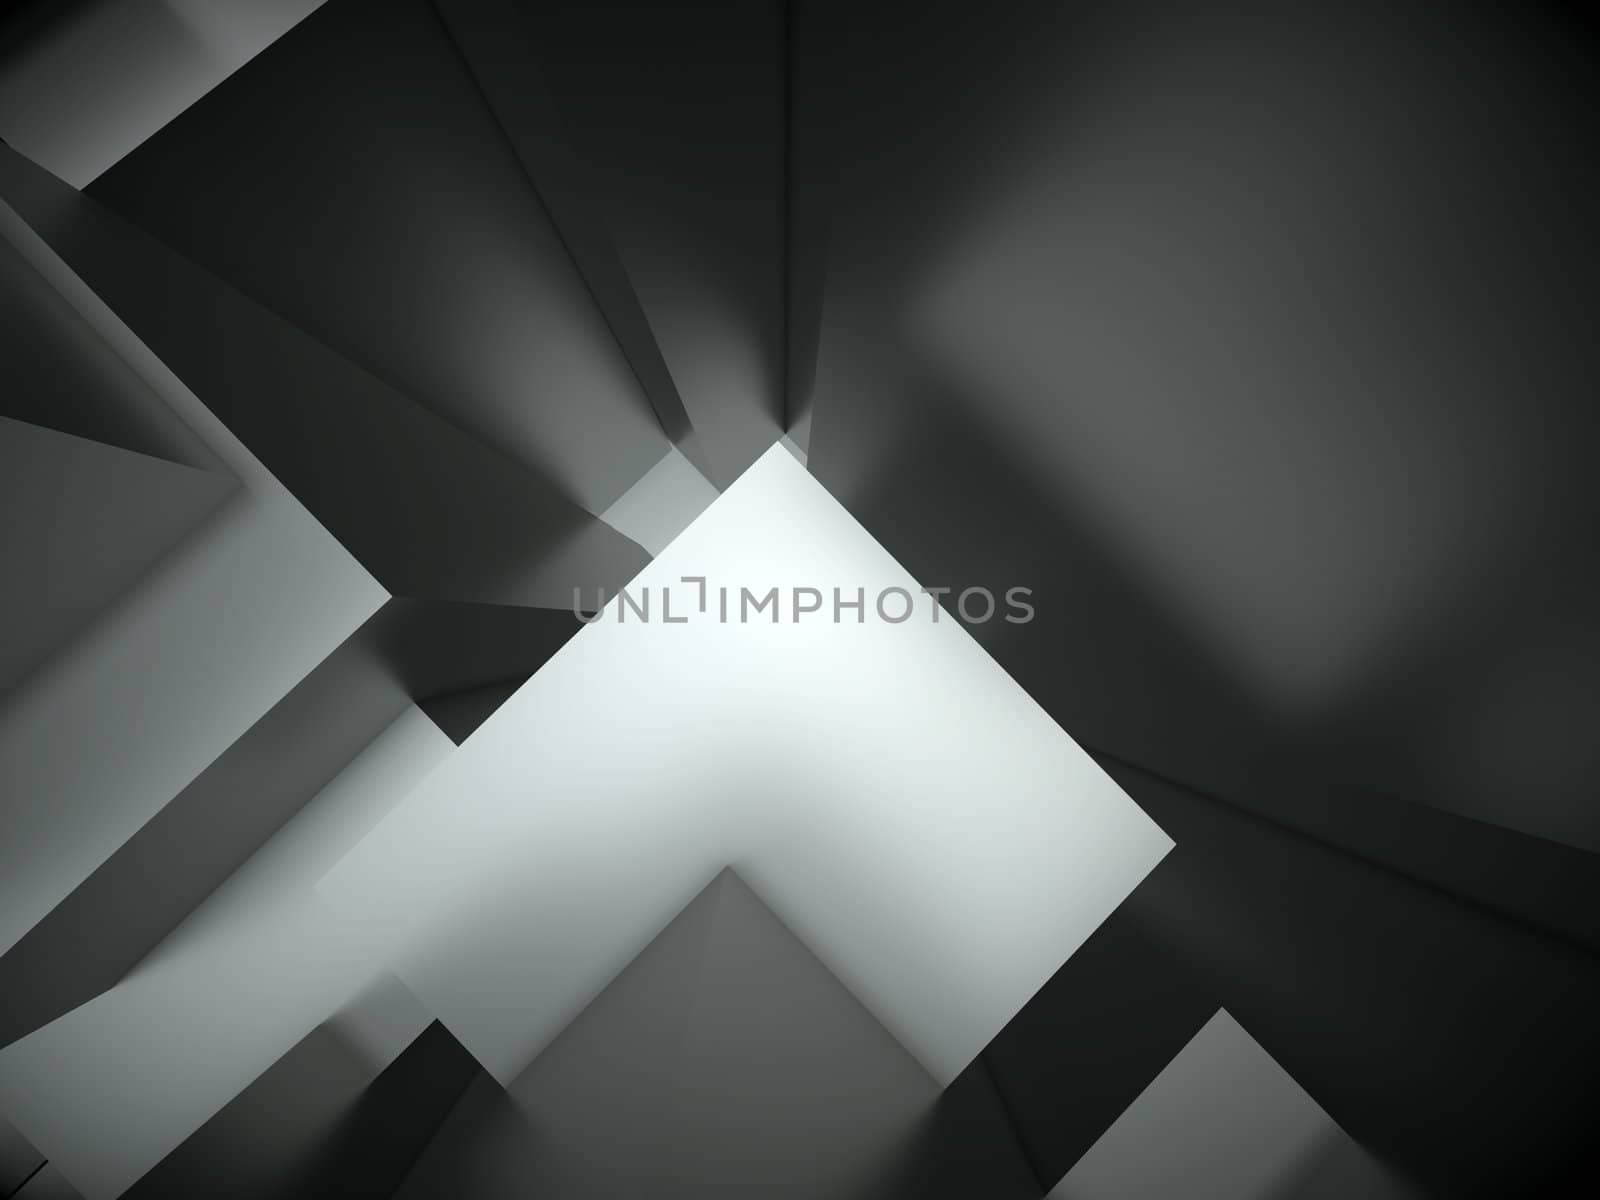 An abstract 3d architectural design